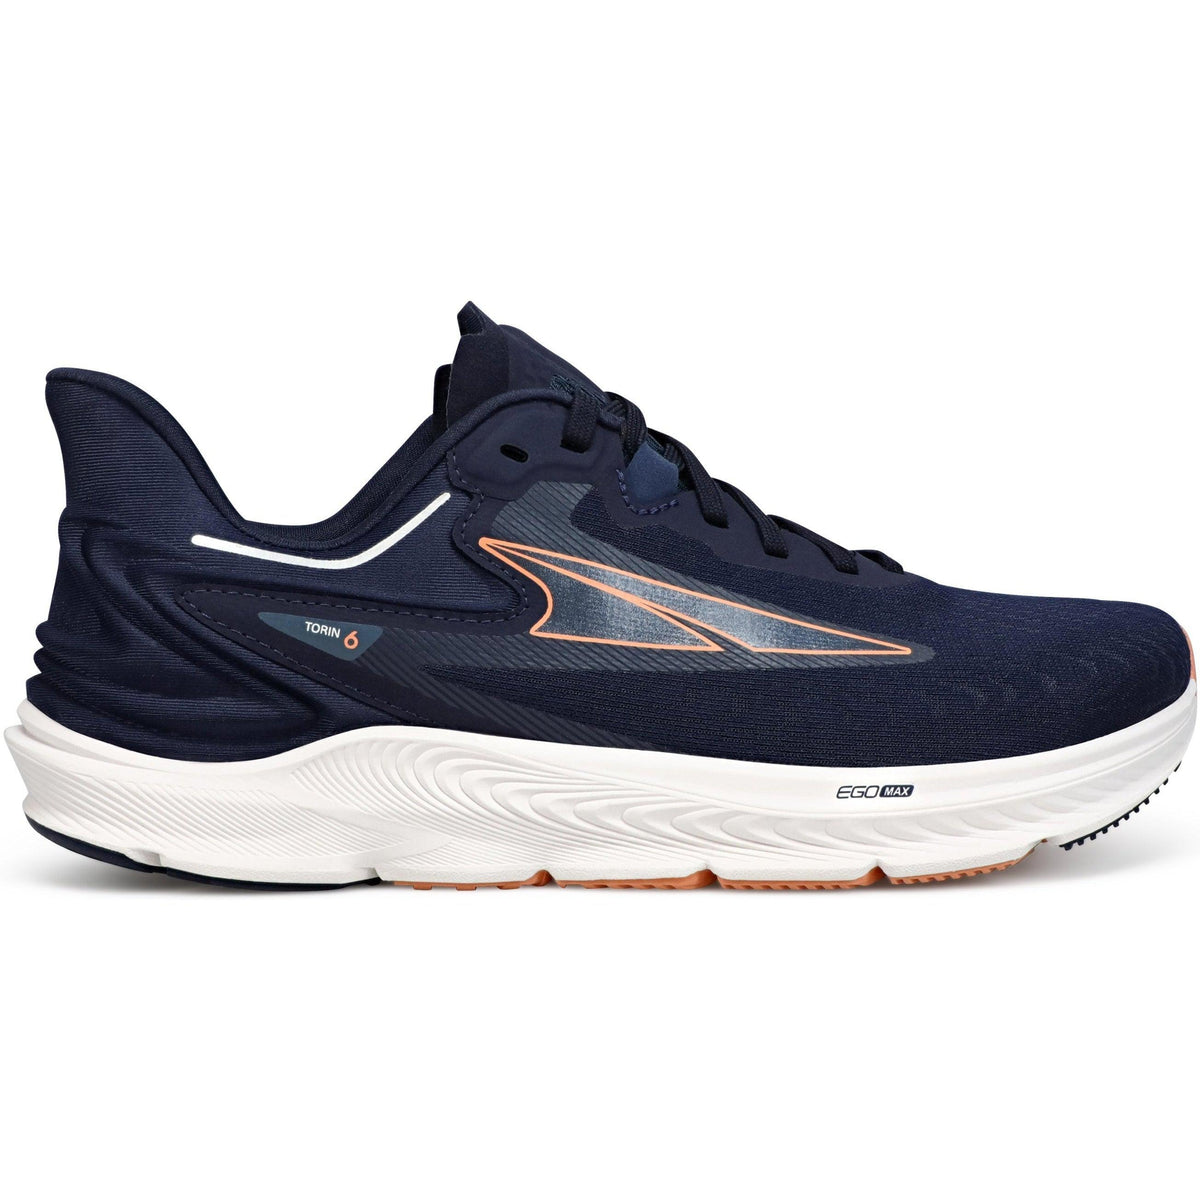 Altra-Women's Altra Torin 6-Navy/Coral-Pacers Running